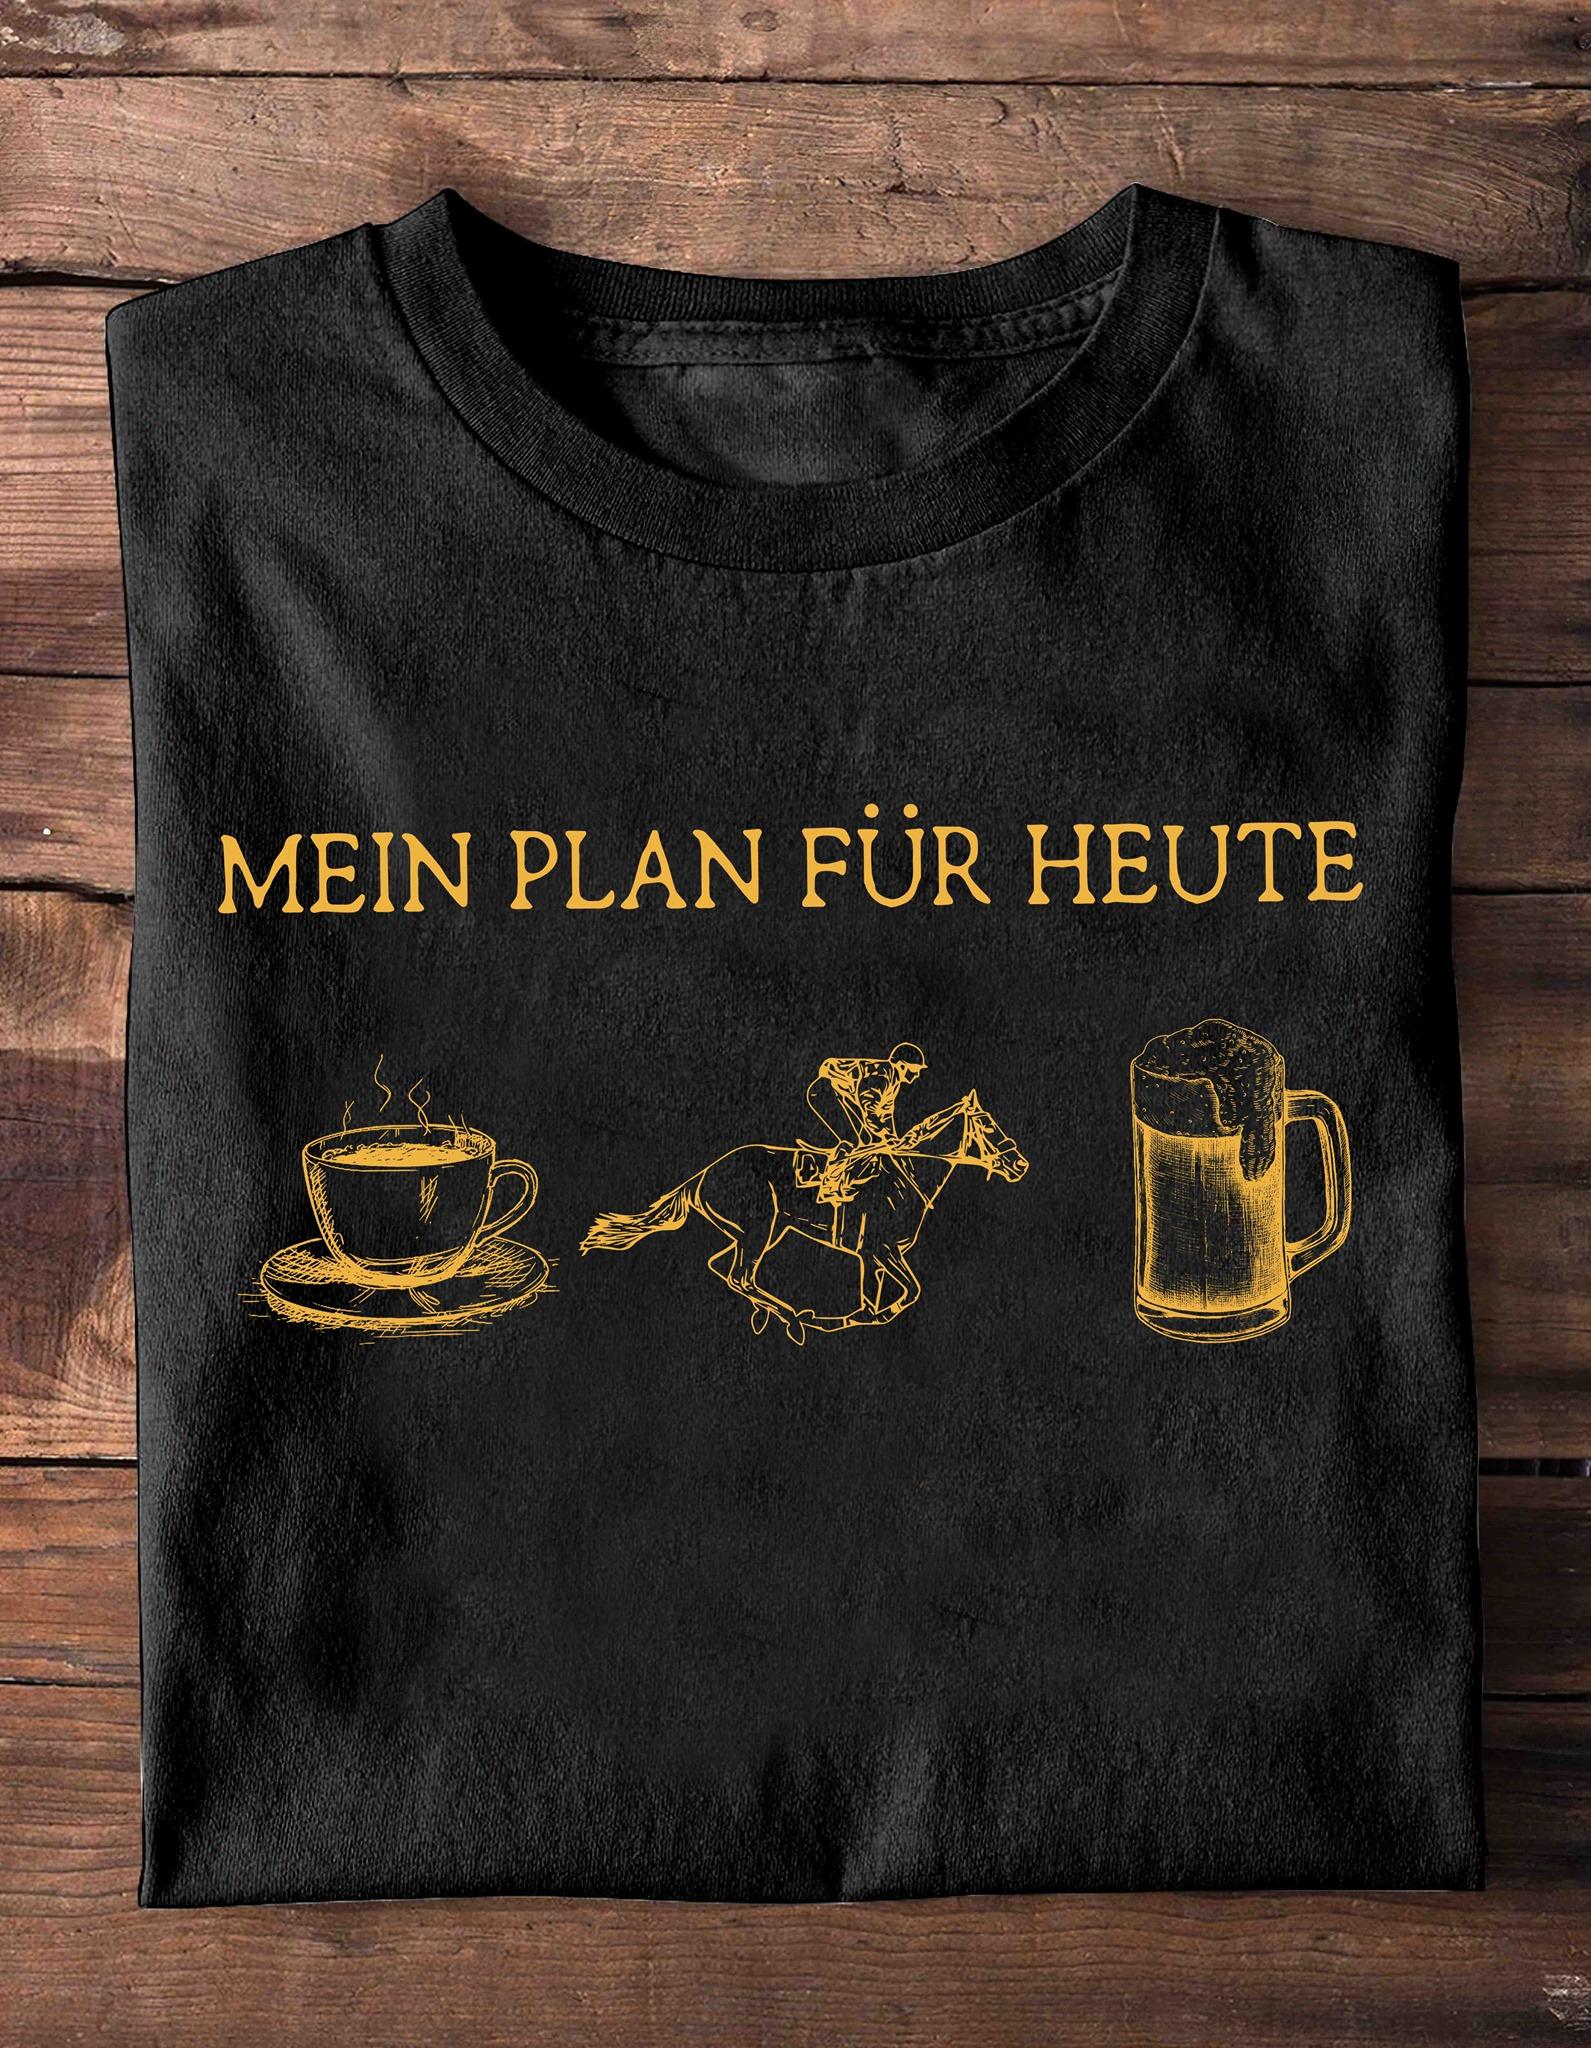 Mein plan fur heute - Horse riding lover, beer and coffee